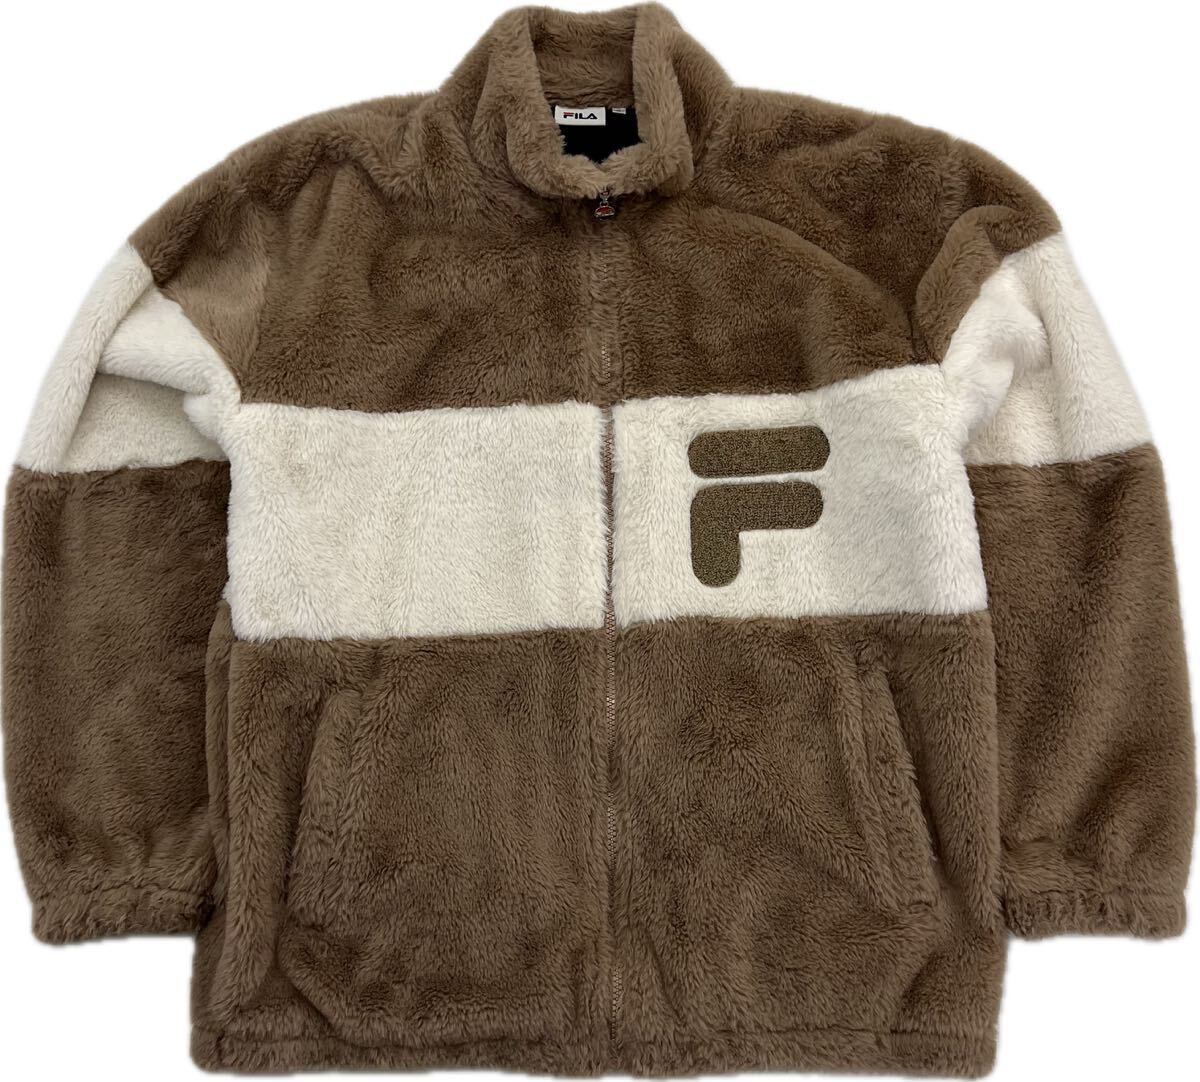 FILA * feel of * boa fleece jacket Brown white M relax sport Street holiday casual part shop put on filler #I314